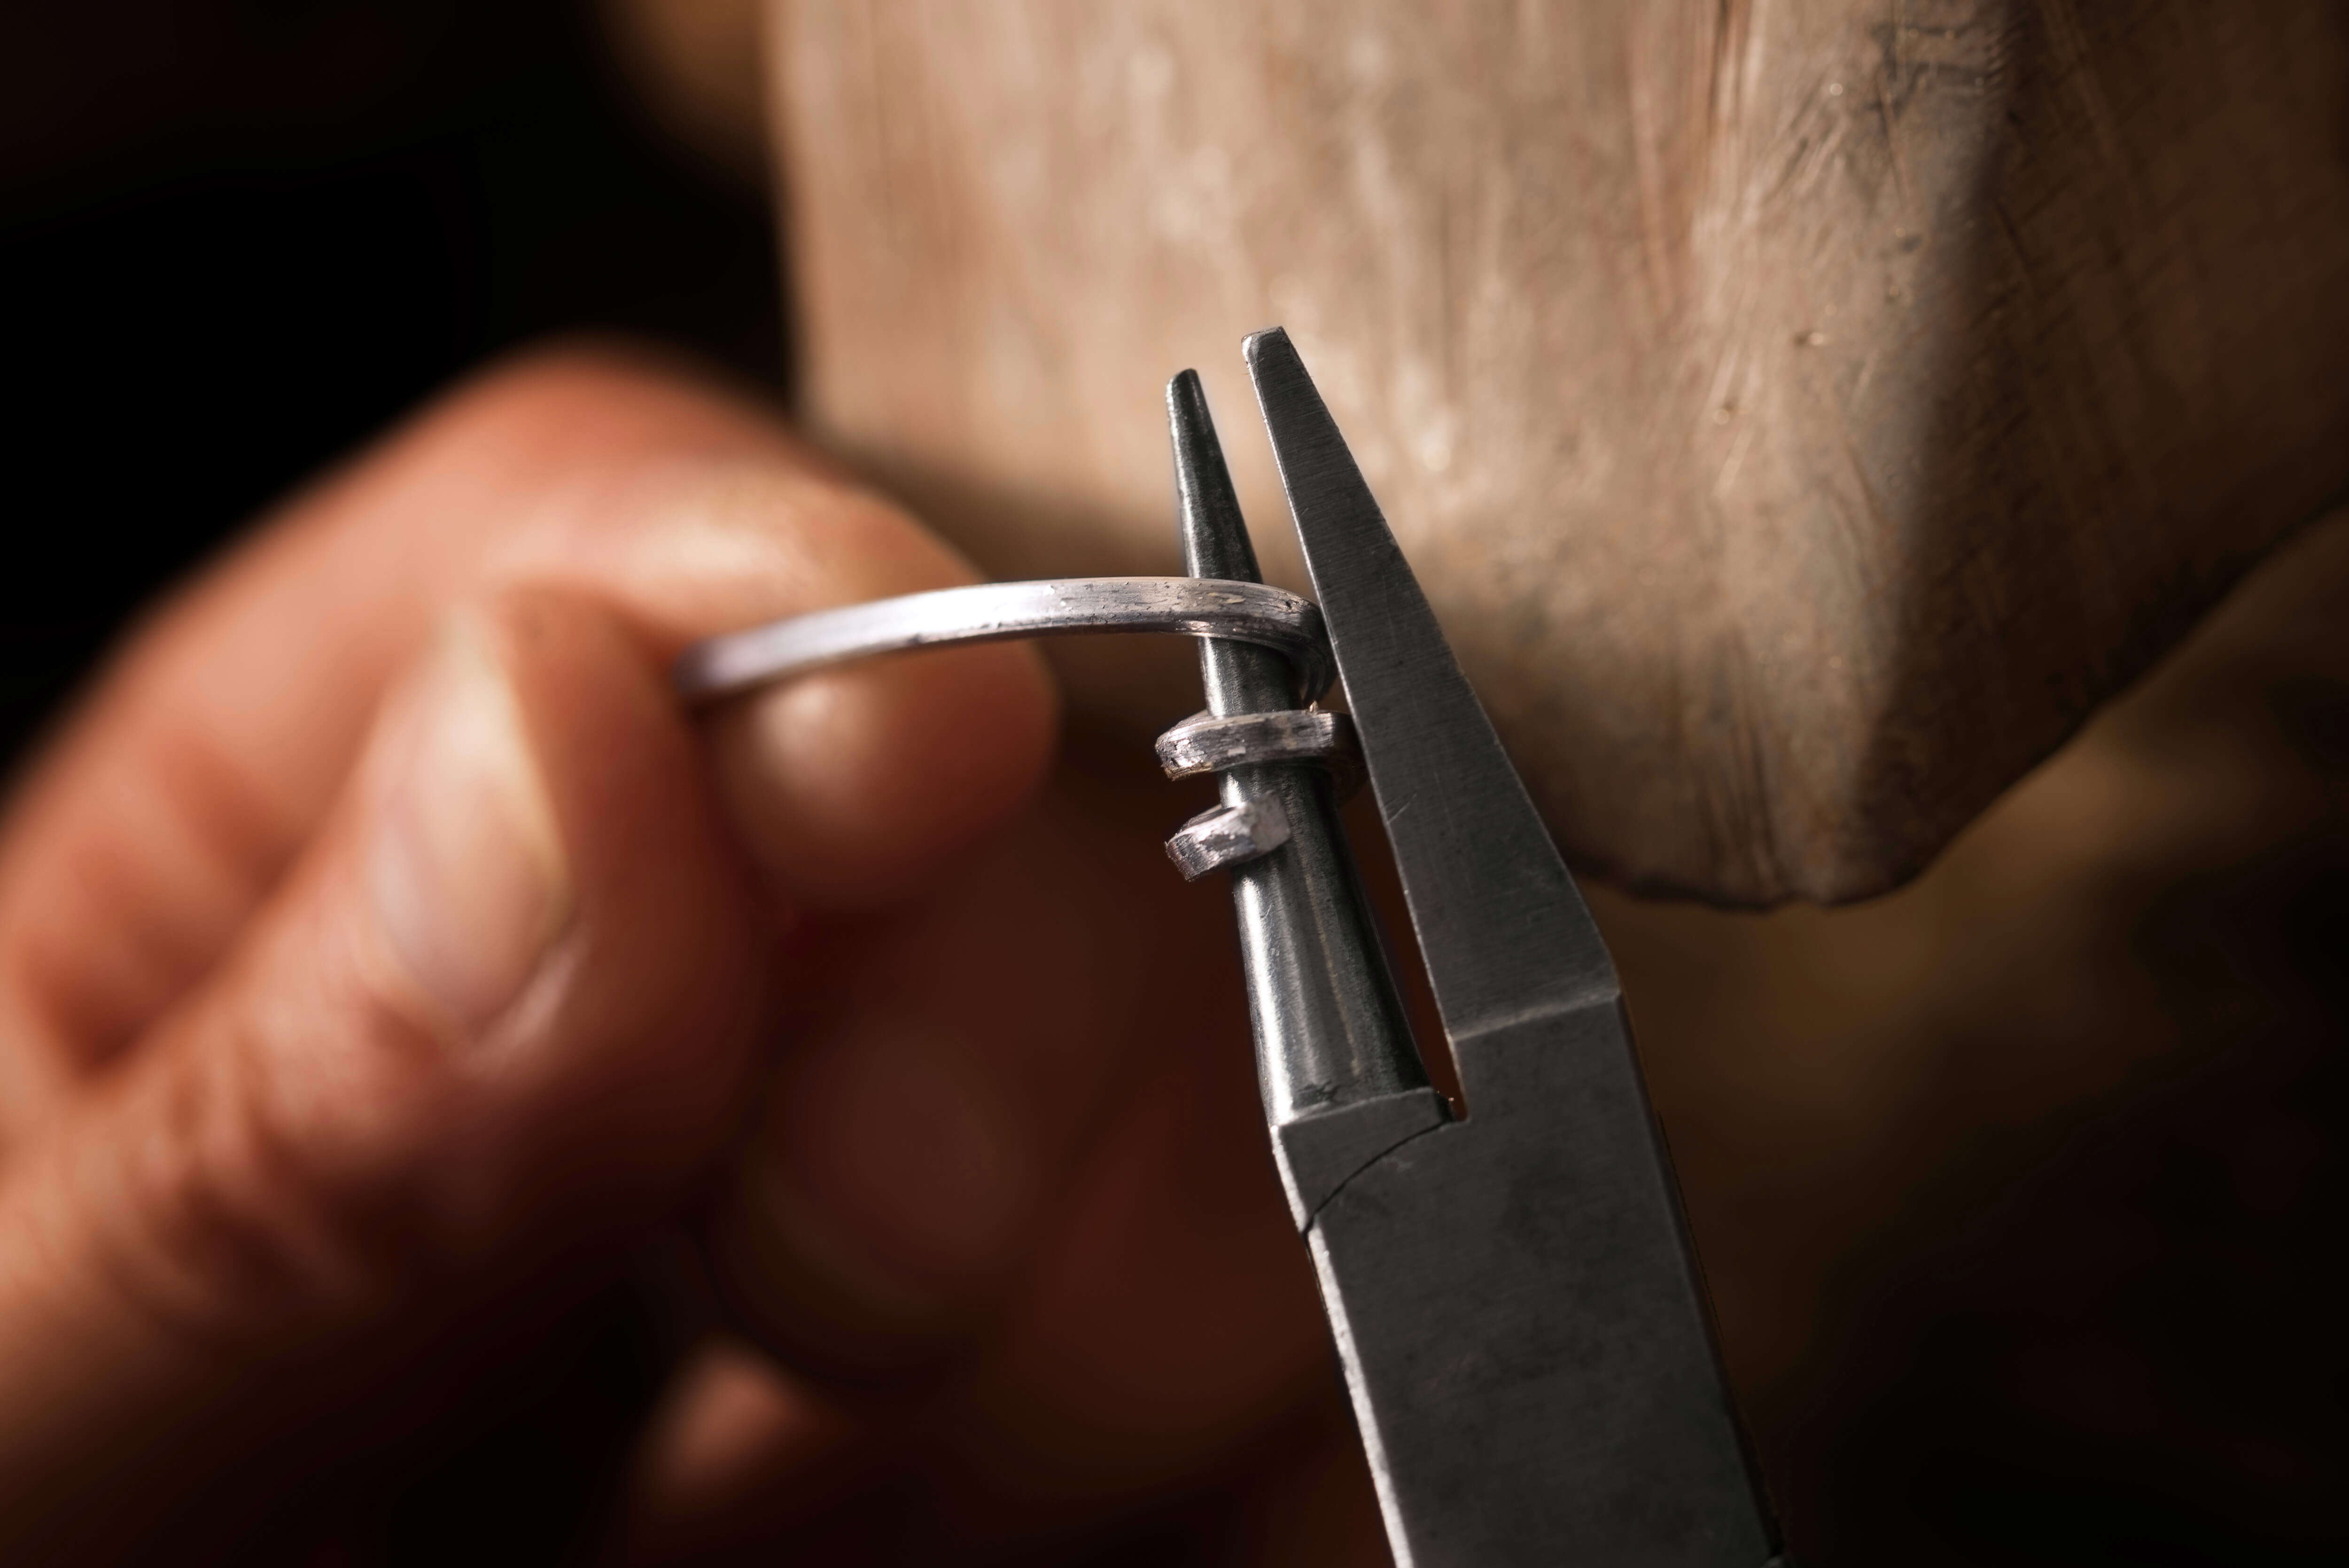 a close up of someone using wire tools to bend the wire